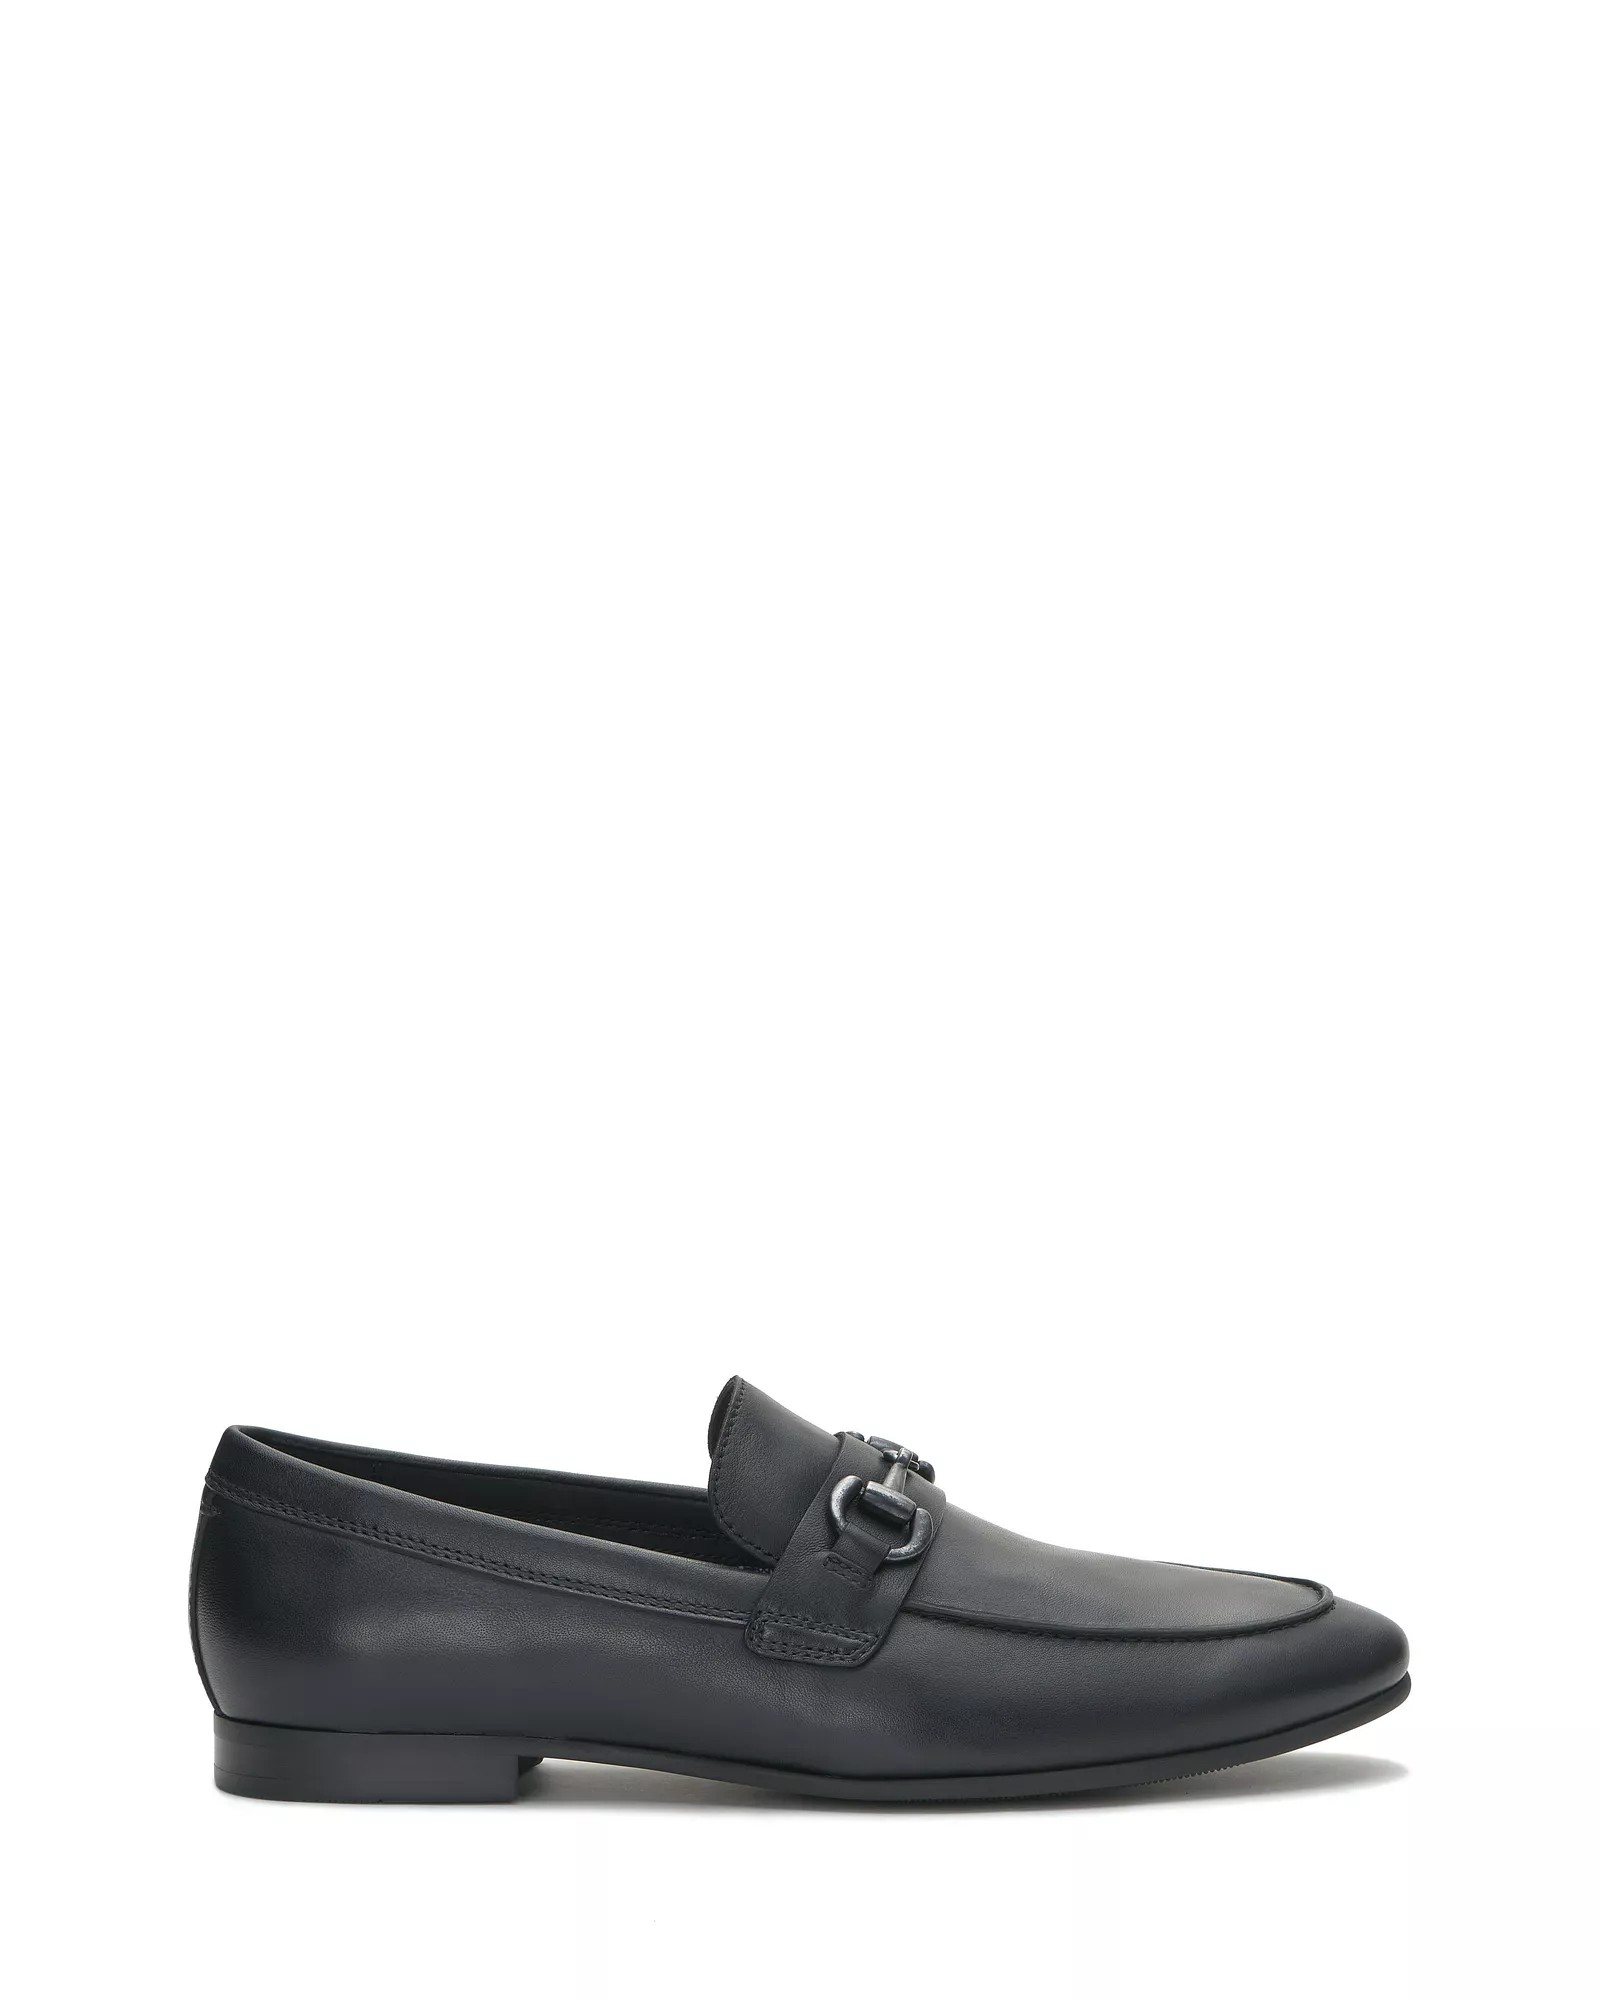 Vince Camuto Men’s Wileen Loafer